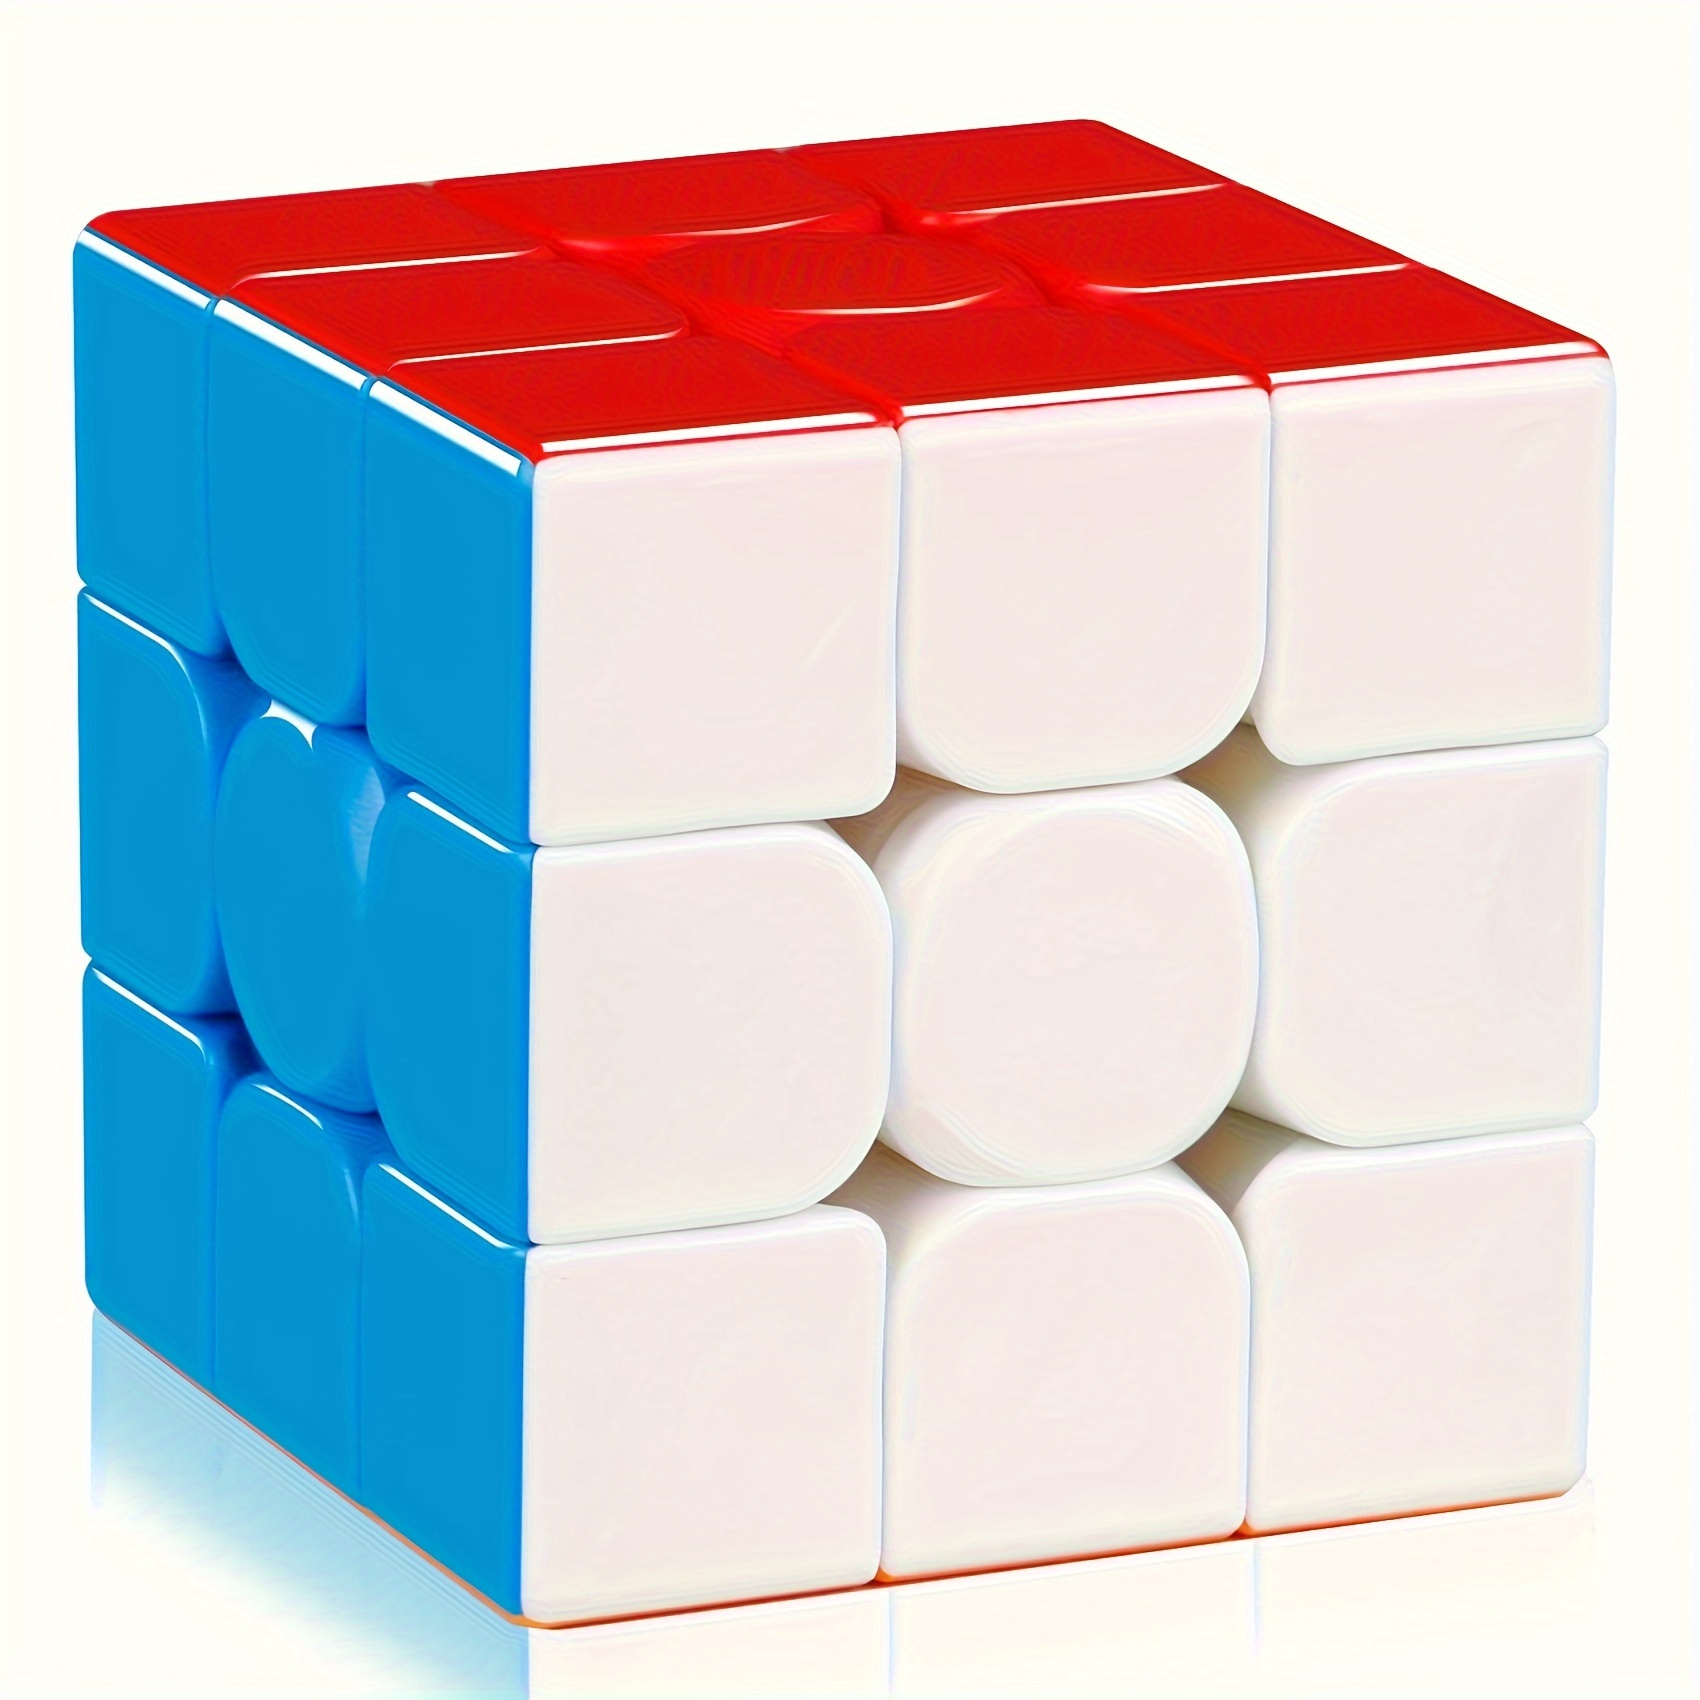 Speed Through Your Puzzles Moyu Cube Classroom Meilong 3c 3x3 Cube